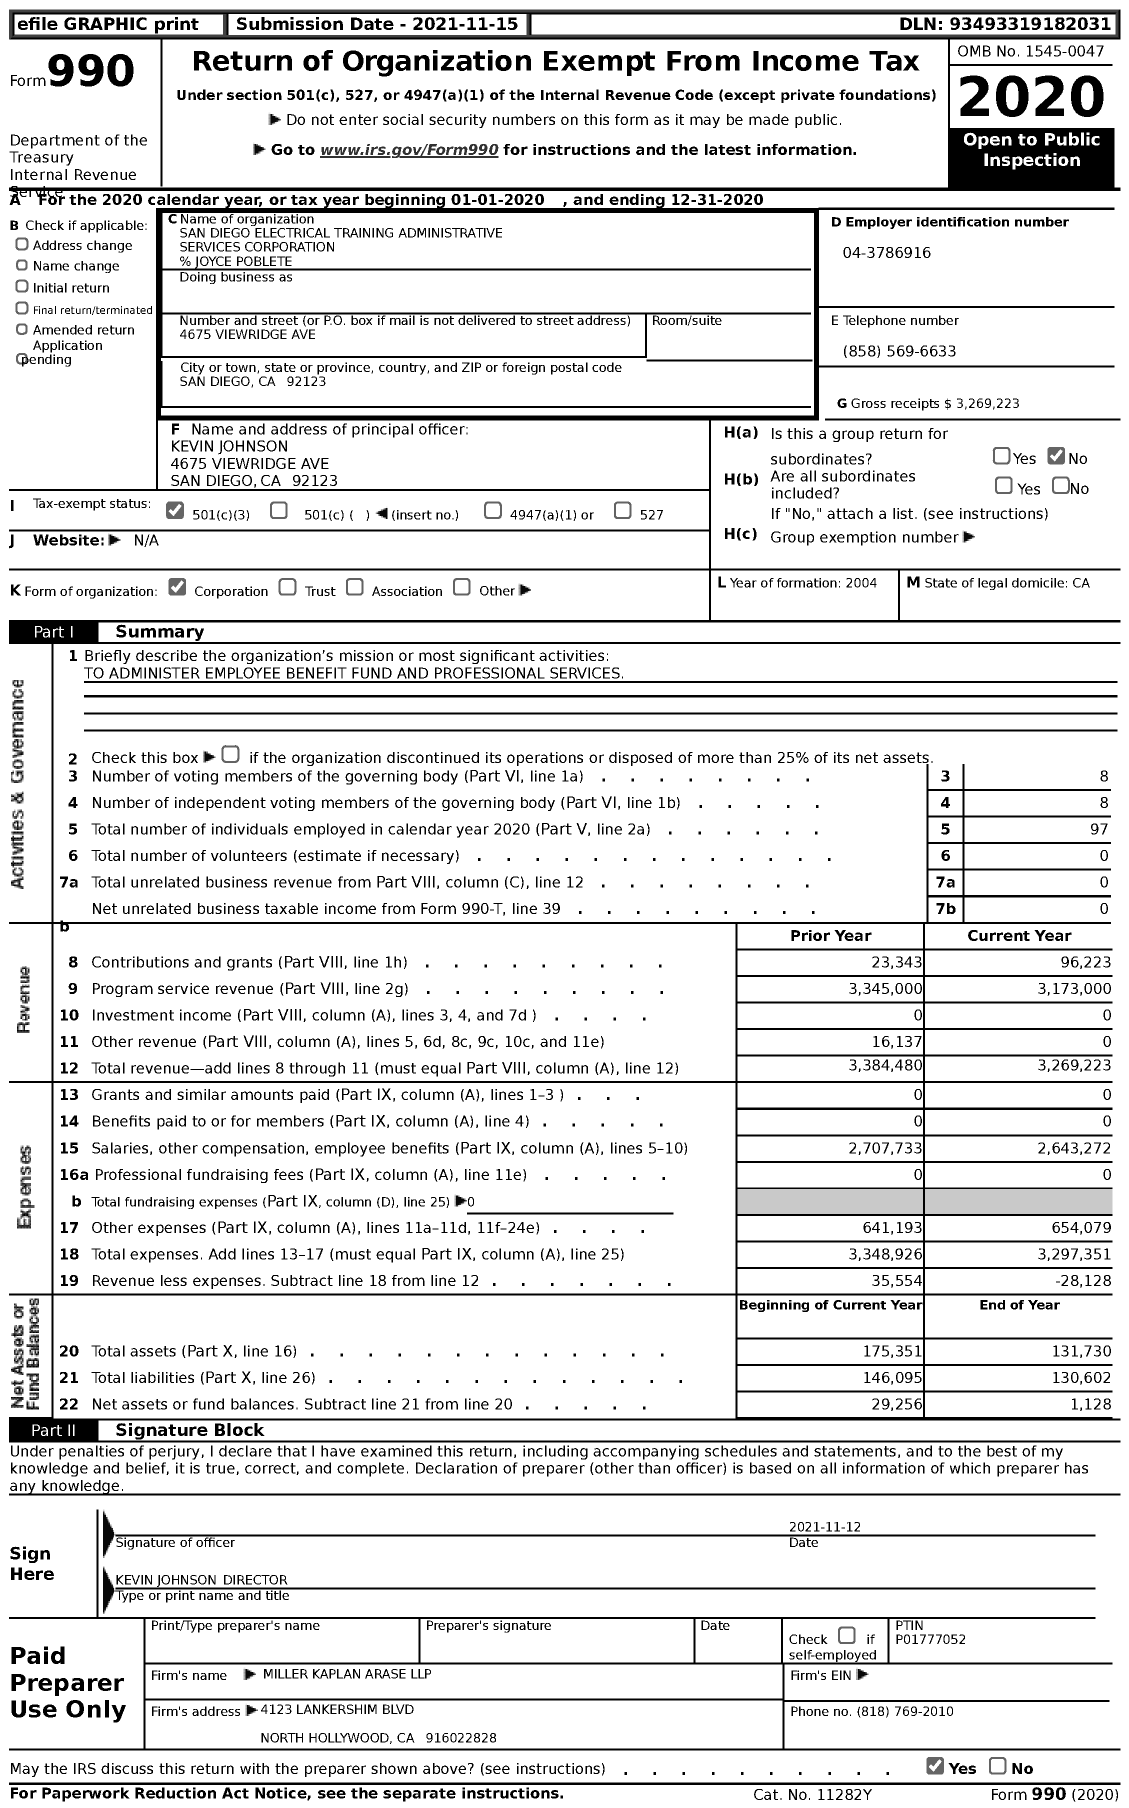 Image of first page of 2020 Form 990 for San Diego Electrical Training Administrative Services Corporation